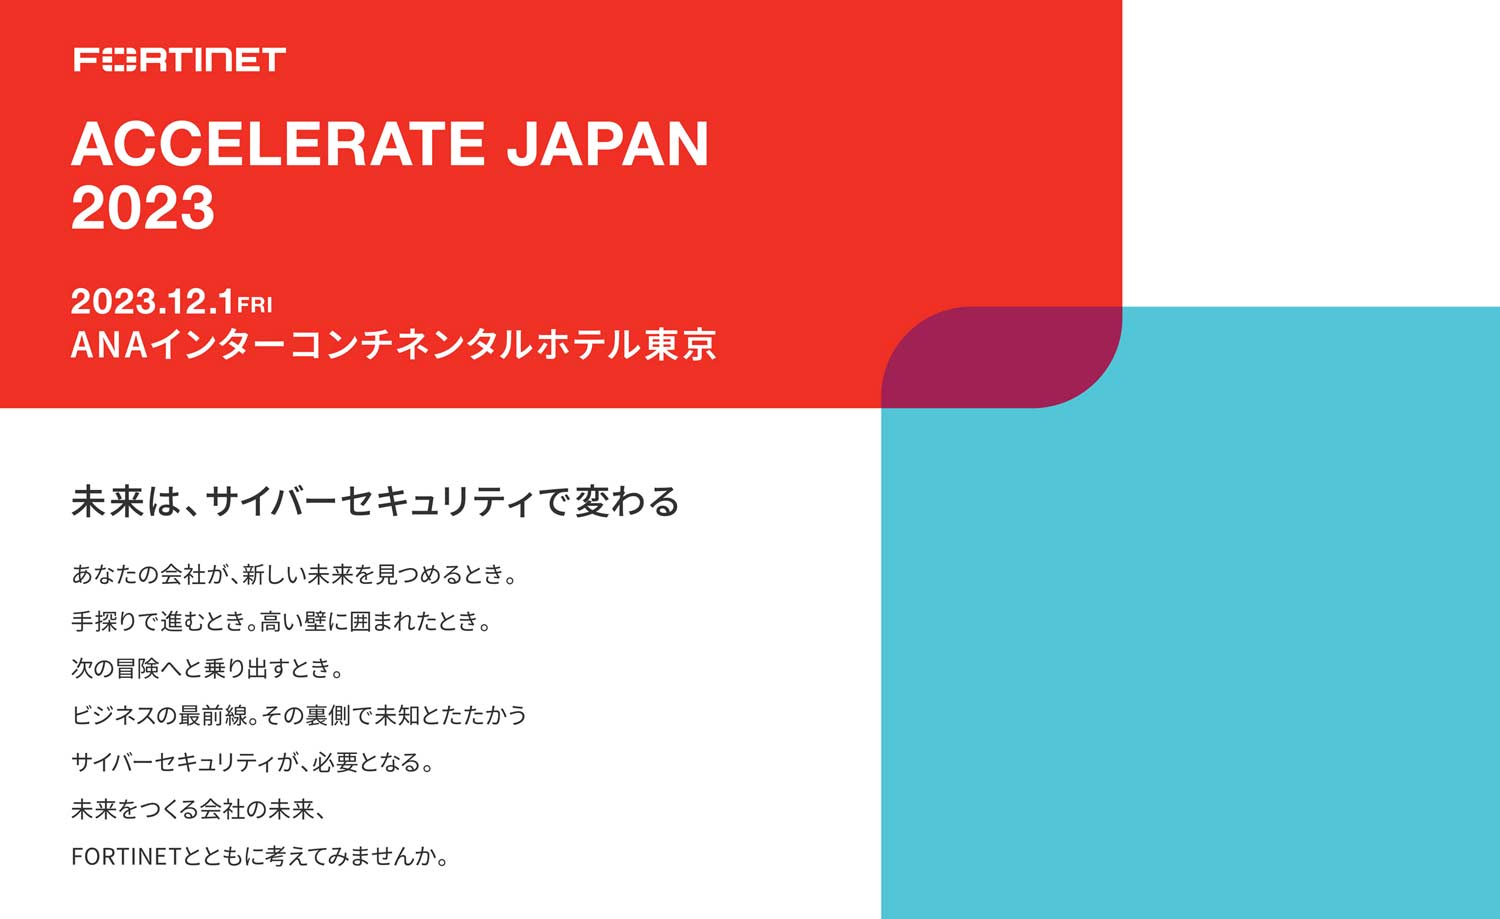 FORTINET「ACCELERATE JAPAN 2023」